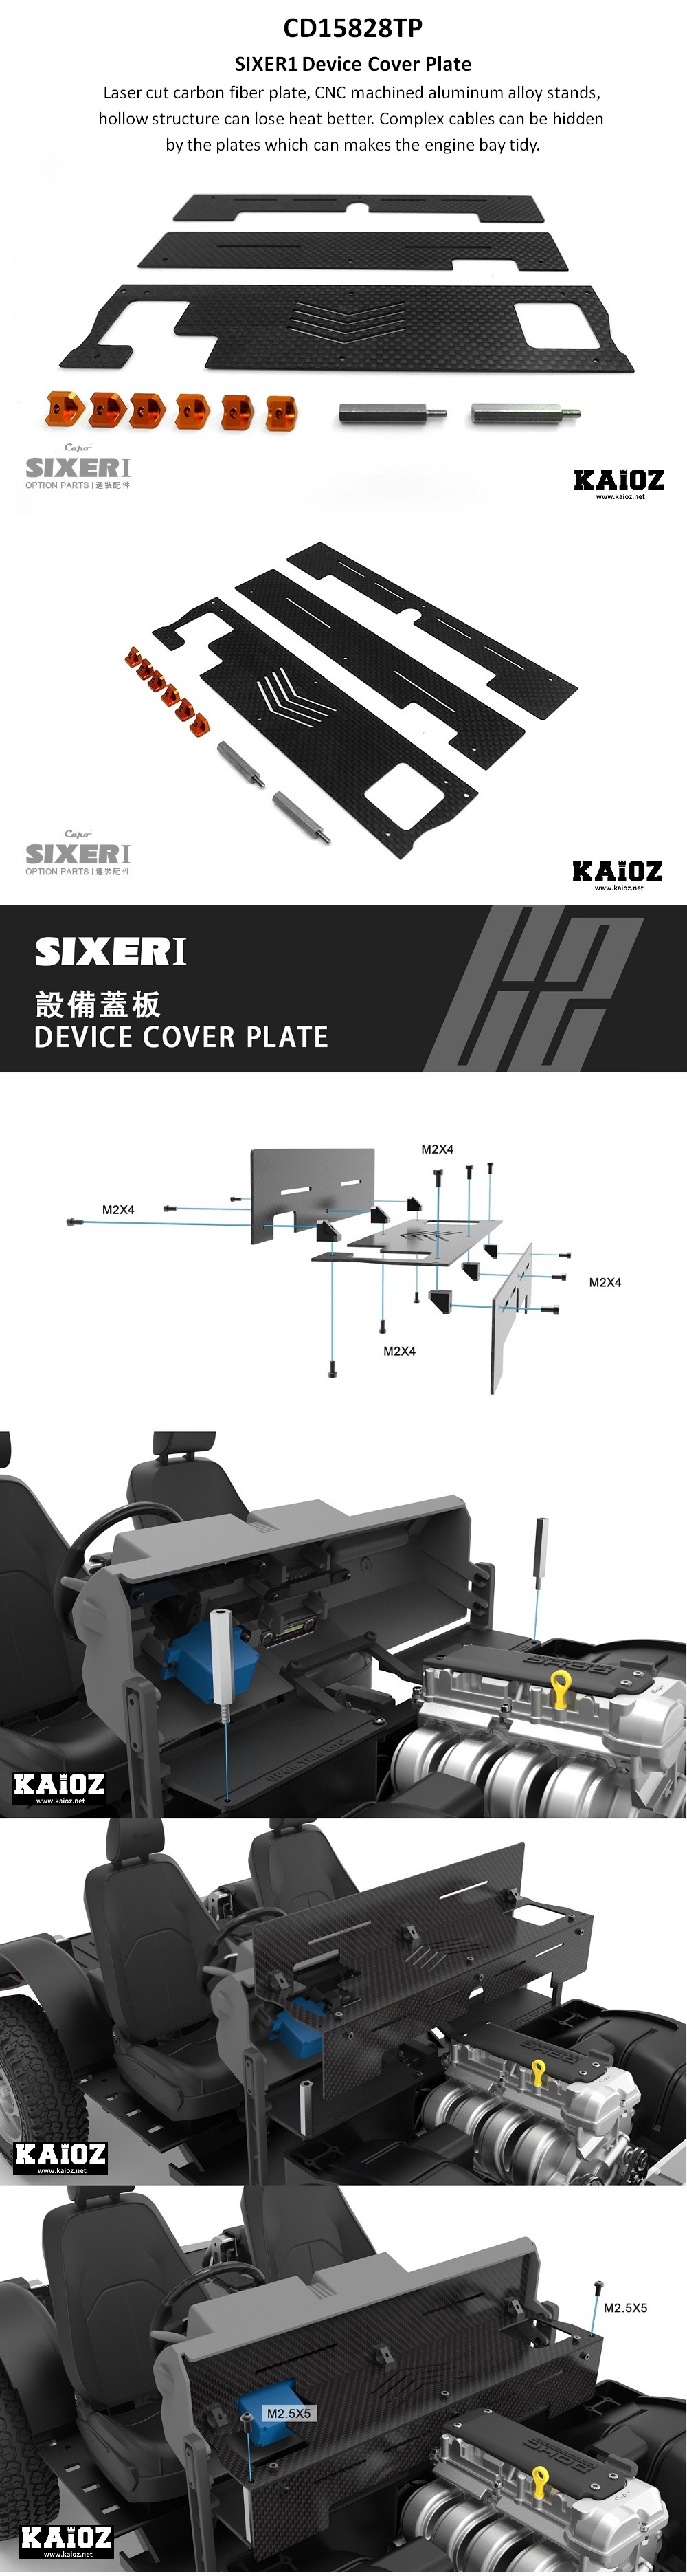 11_CD15828CP_SIXER1 Device Cover Plate.jpg